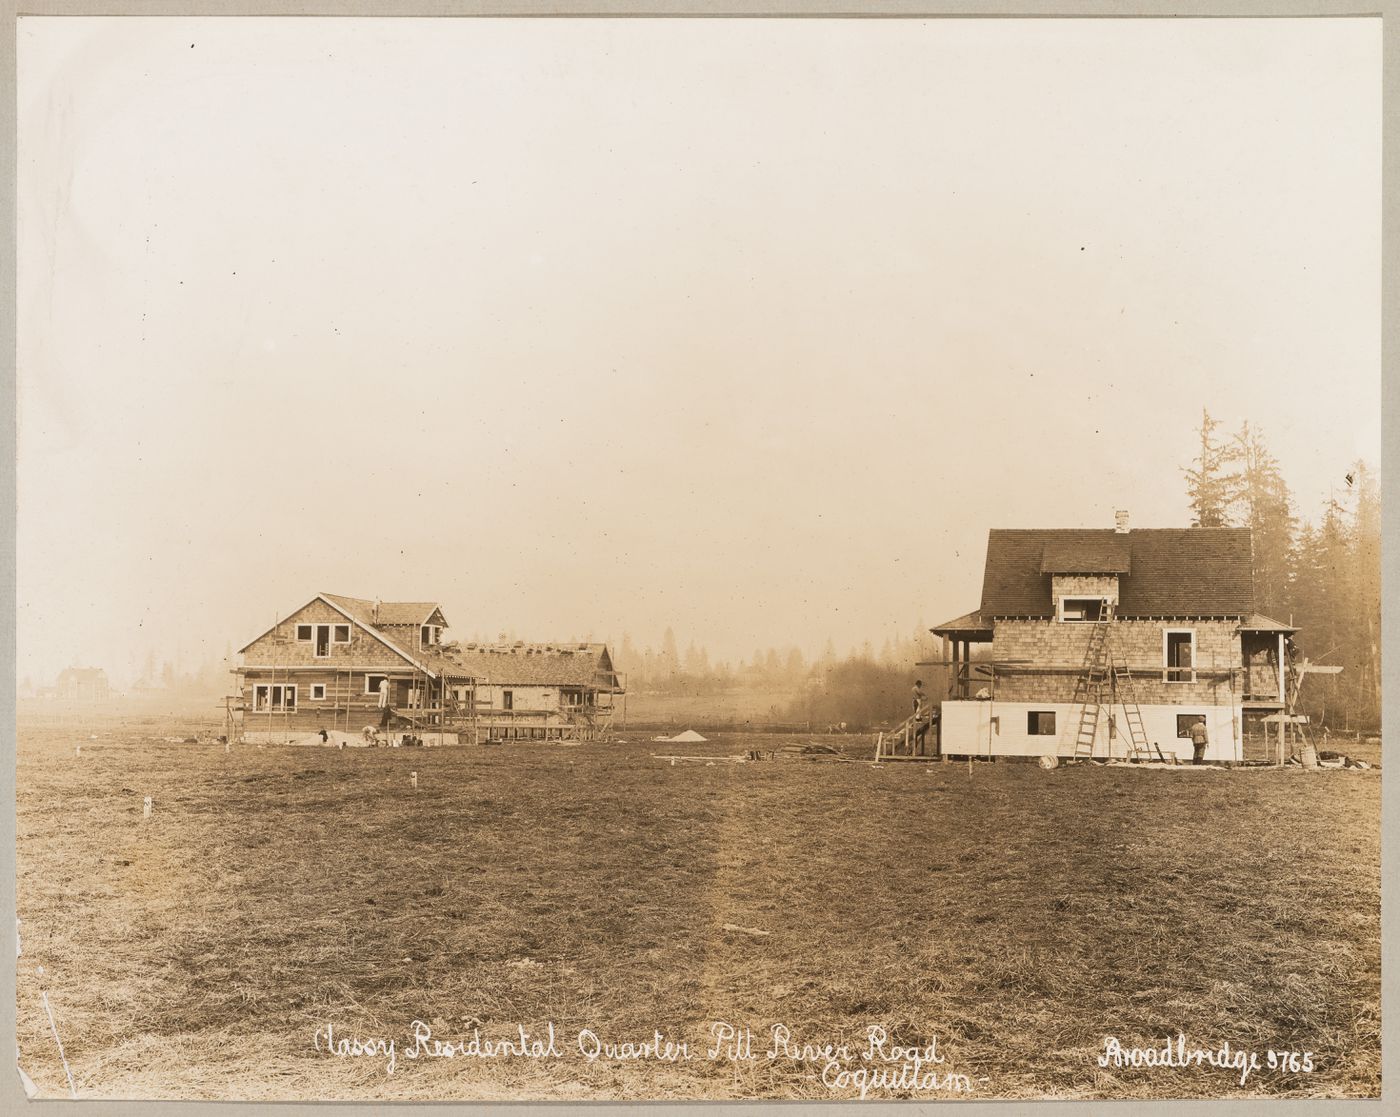 View of houses under construction, Coquitlam (now Port Coquitlam), British Columbia